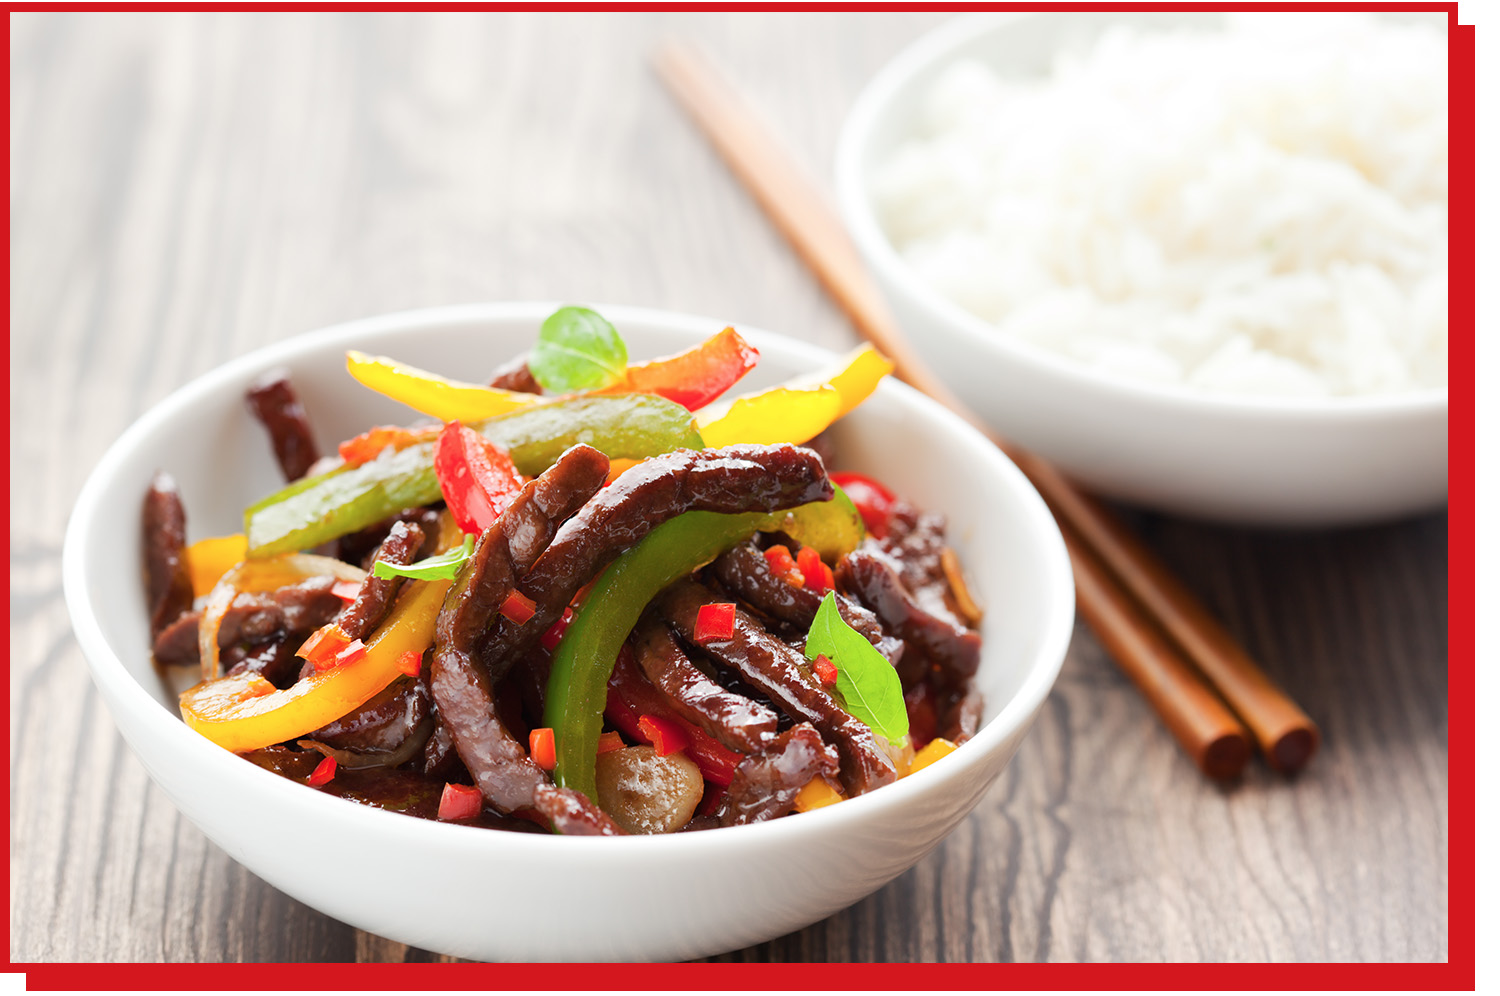 A bowl of beef and vegetable stir fry sits on a tabletop, with chopsticks and rice.